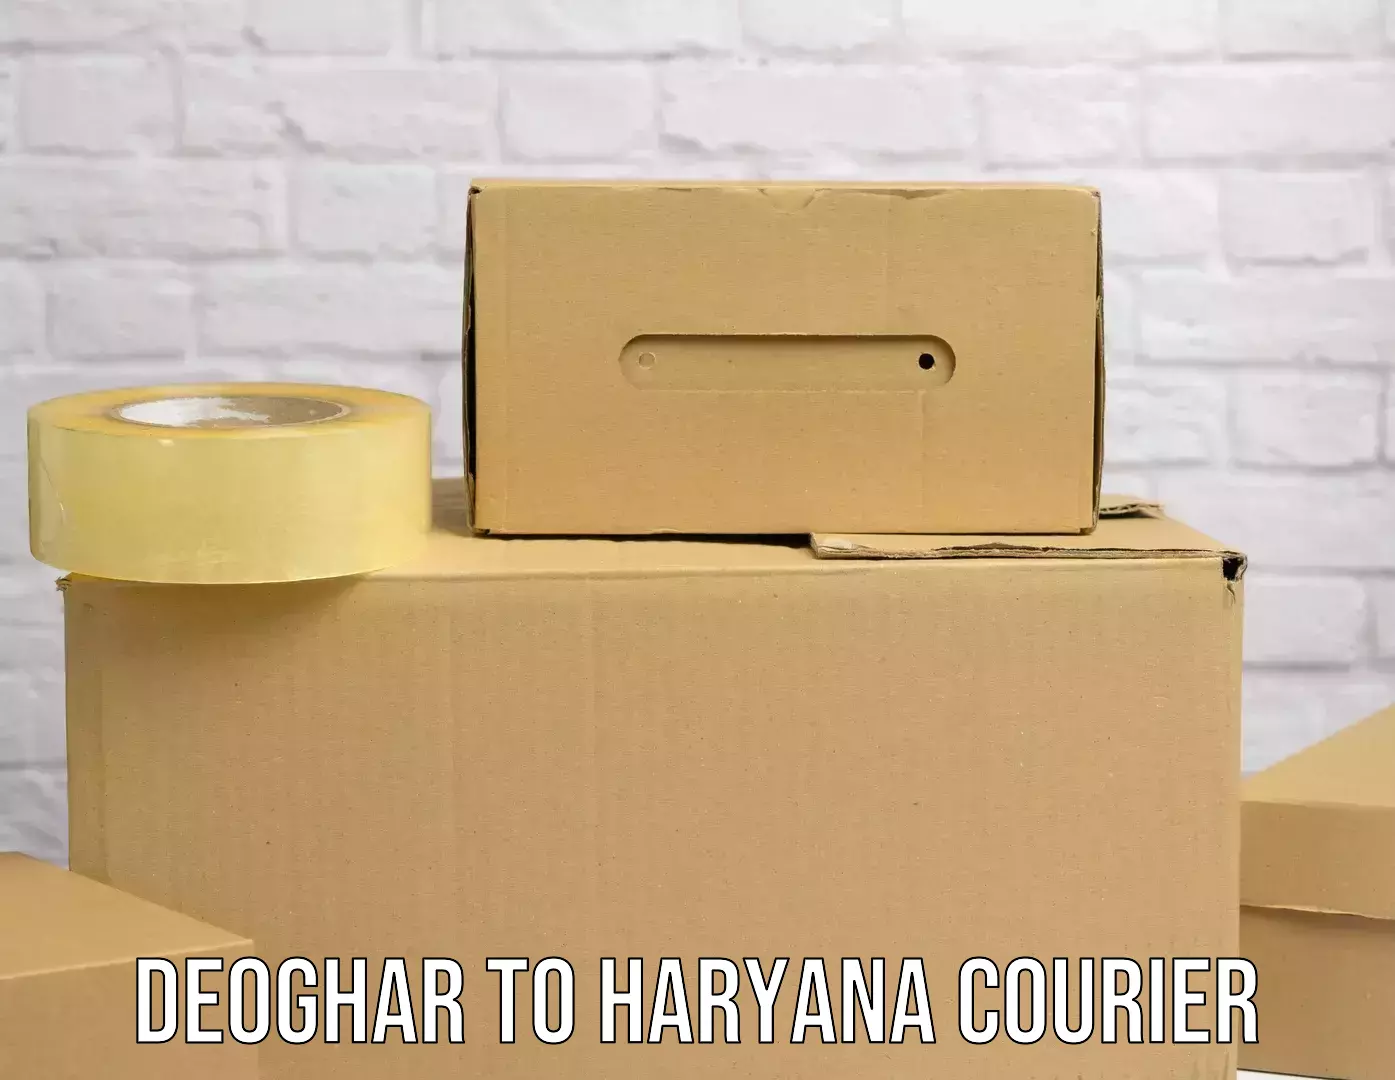 Advanced shipping network Deoghar to Hansi